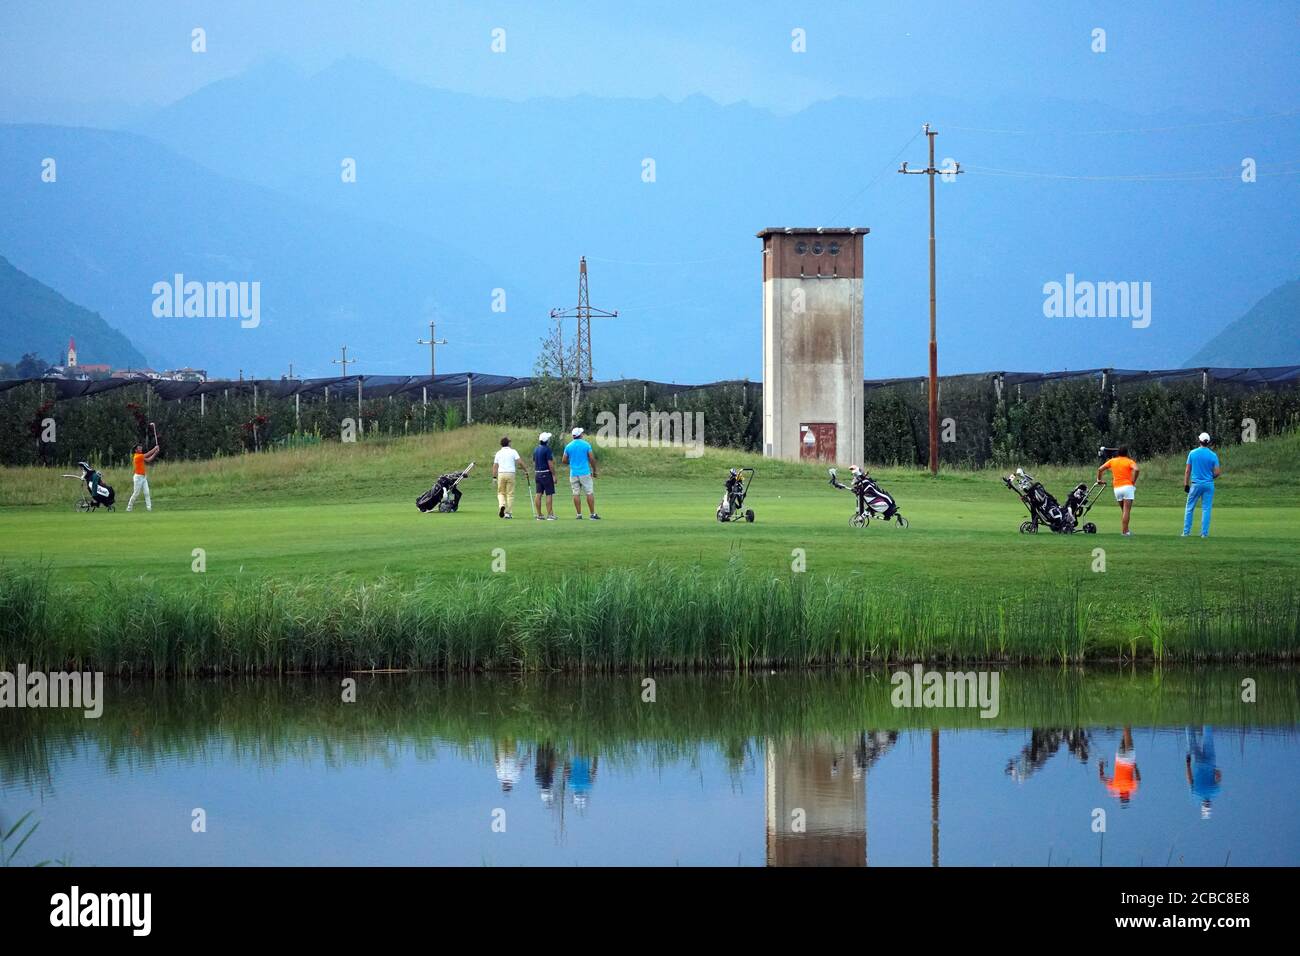 Group of friends - golfers enjoying the game in the Blue Monster Golf Club in South Tirol Italy after COVID-19 lock down on August 11th, 2020. Stock Photo